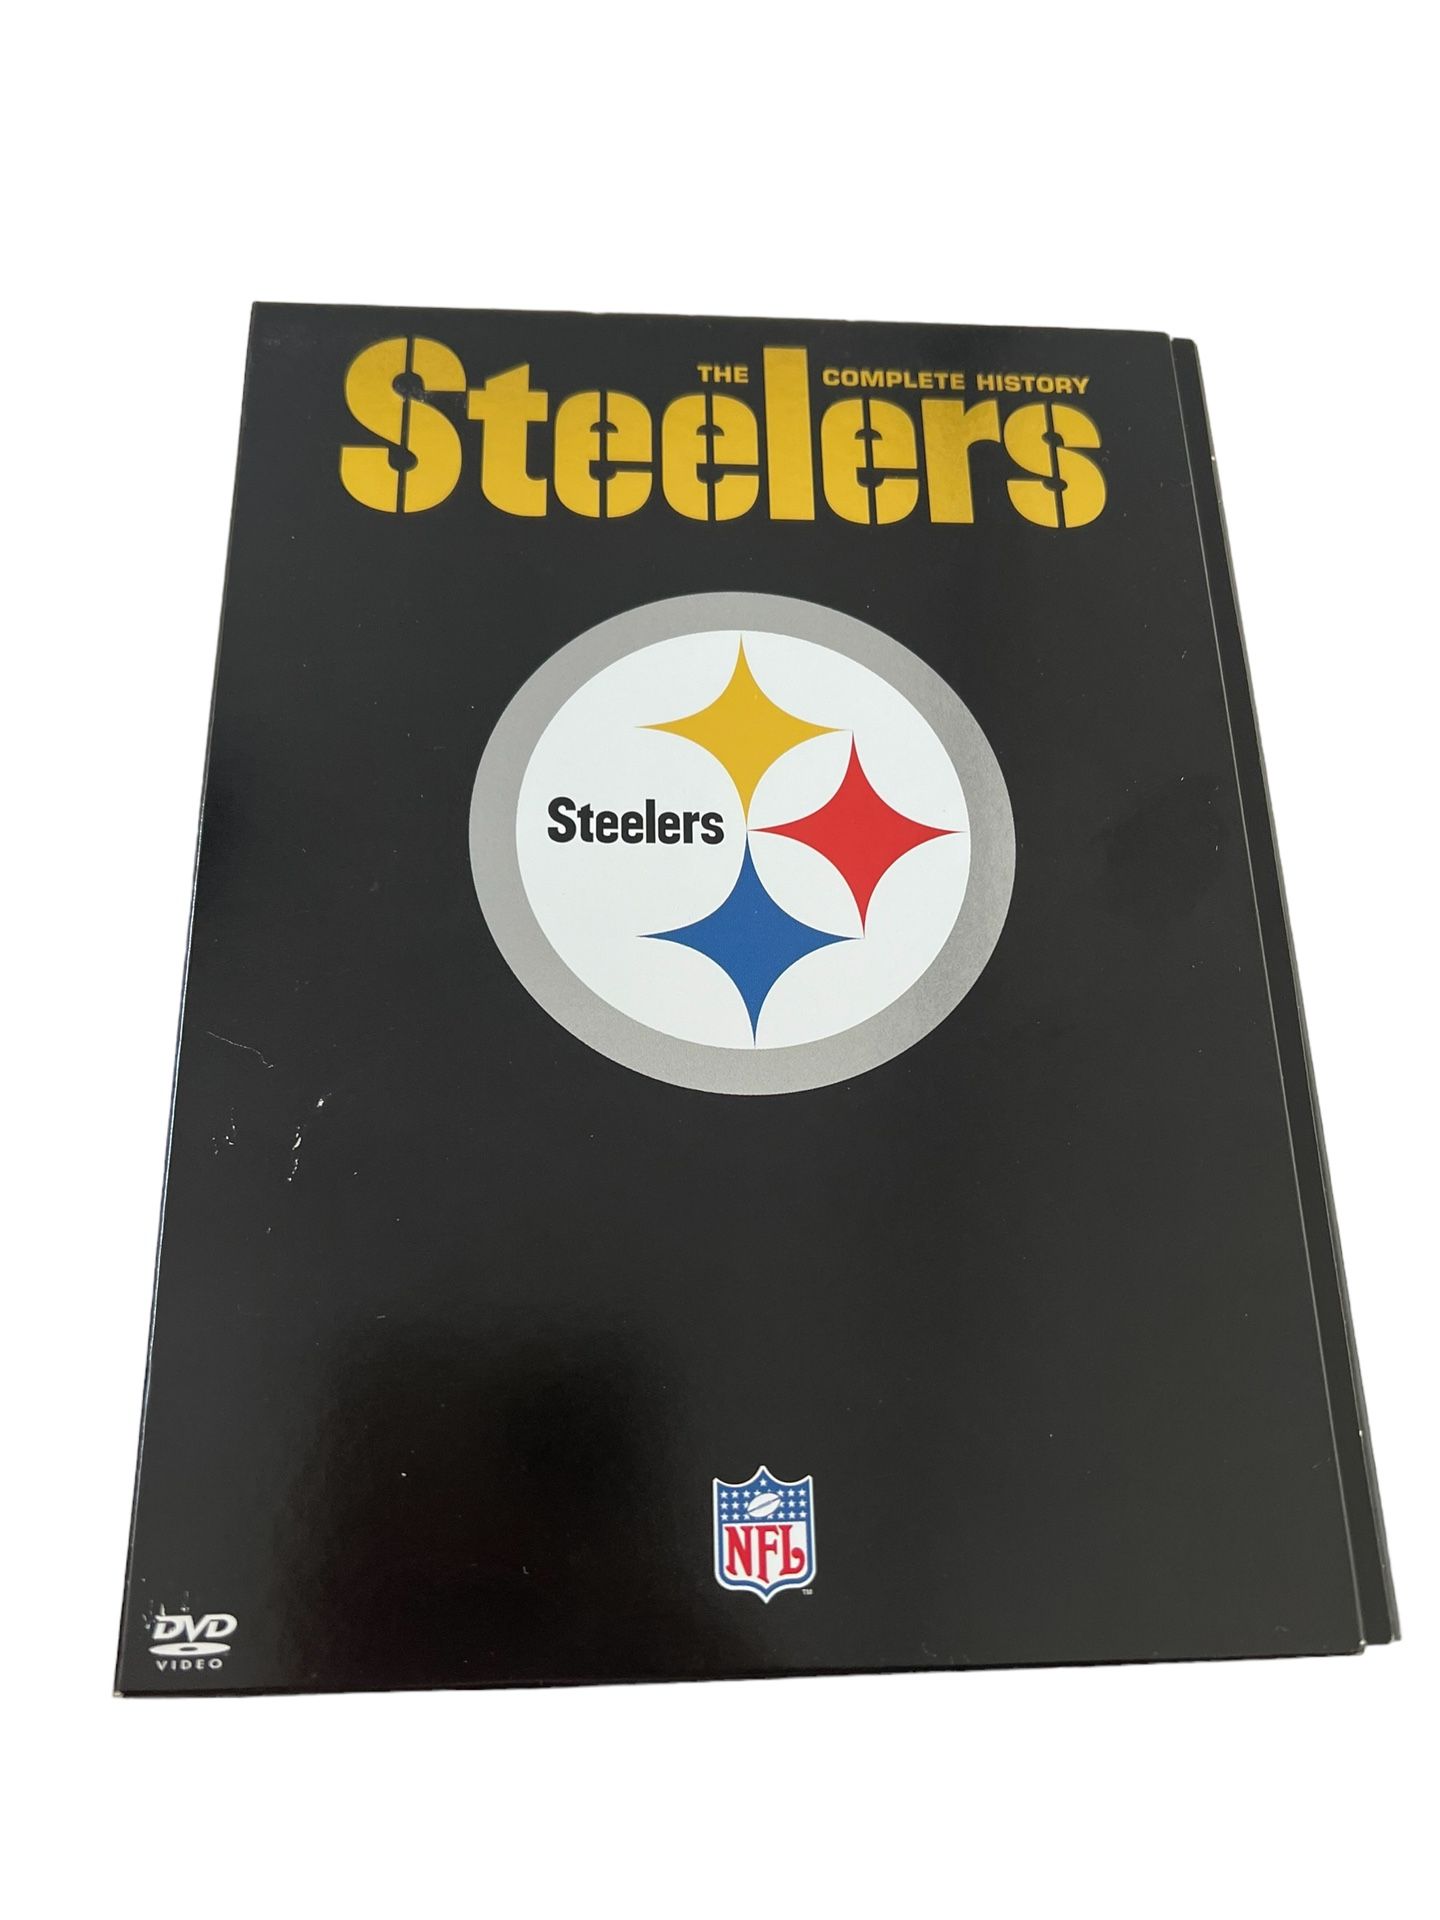 The Complete History of the Pittsburgh Steelers (DVD)   This DVD is a must-have for any fan of the Pittsburgh Steelers! It covers the complete history